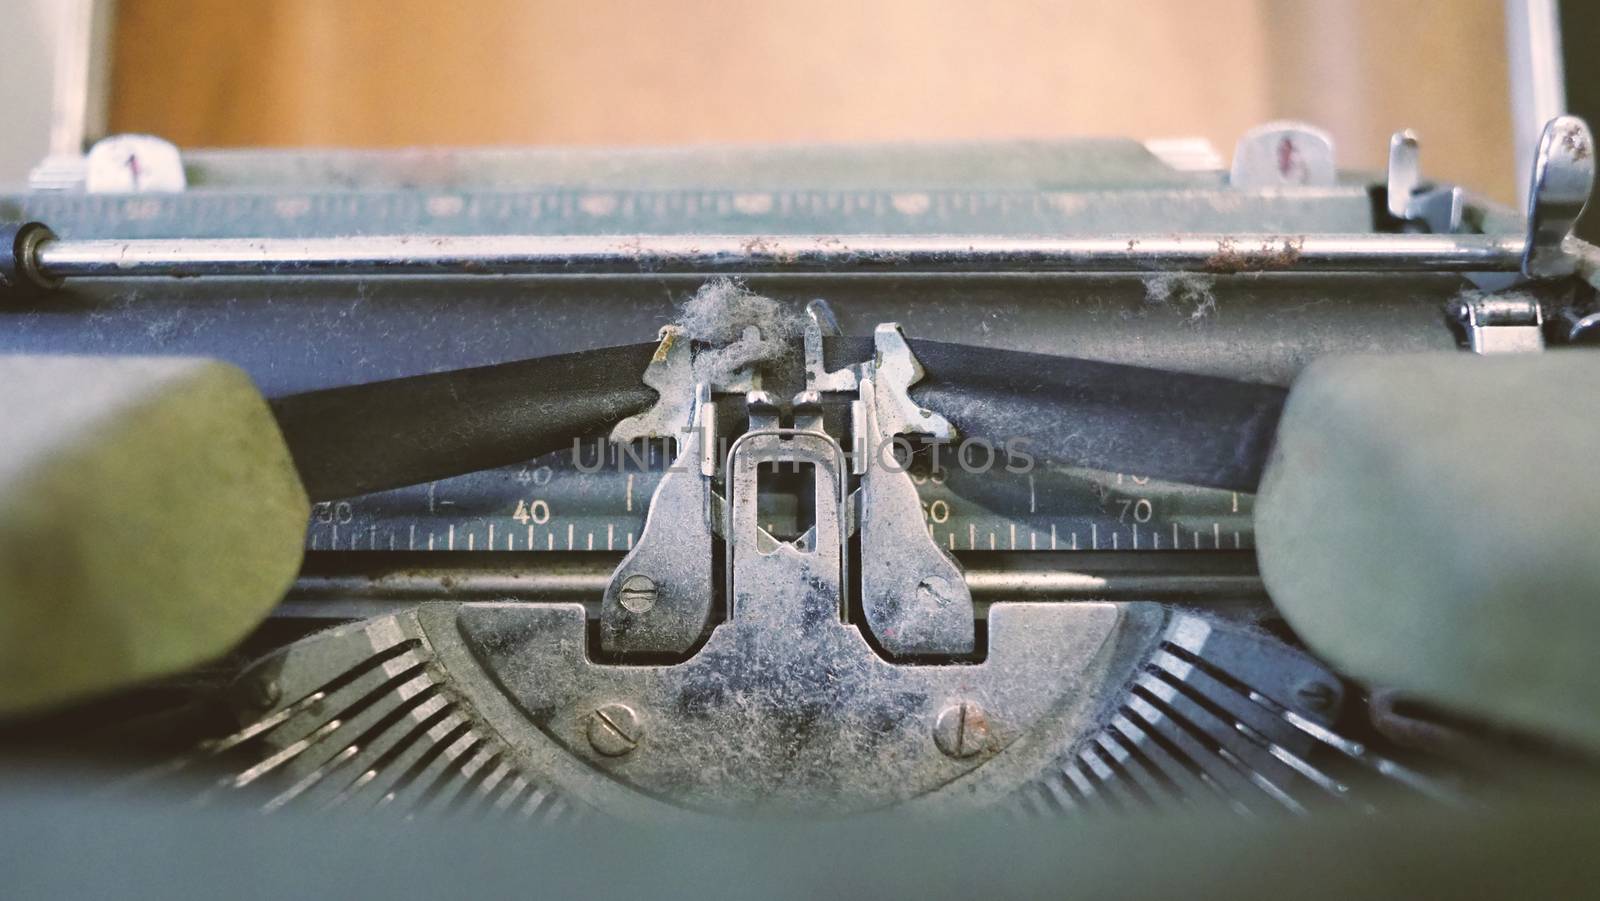 Old typewriter machine in good condition with no paper in feed for use in the past job career such as write office document, copywriter, author, news journalist, secretary, creative and more. 